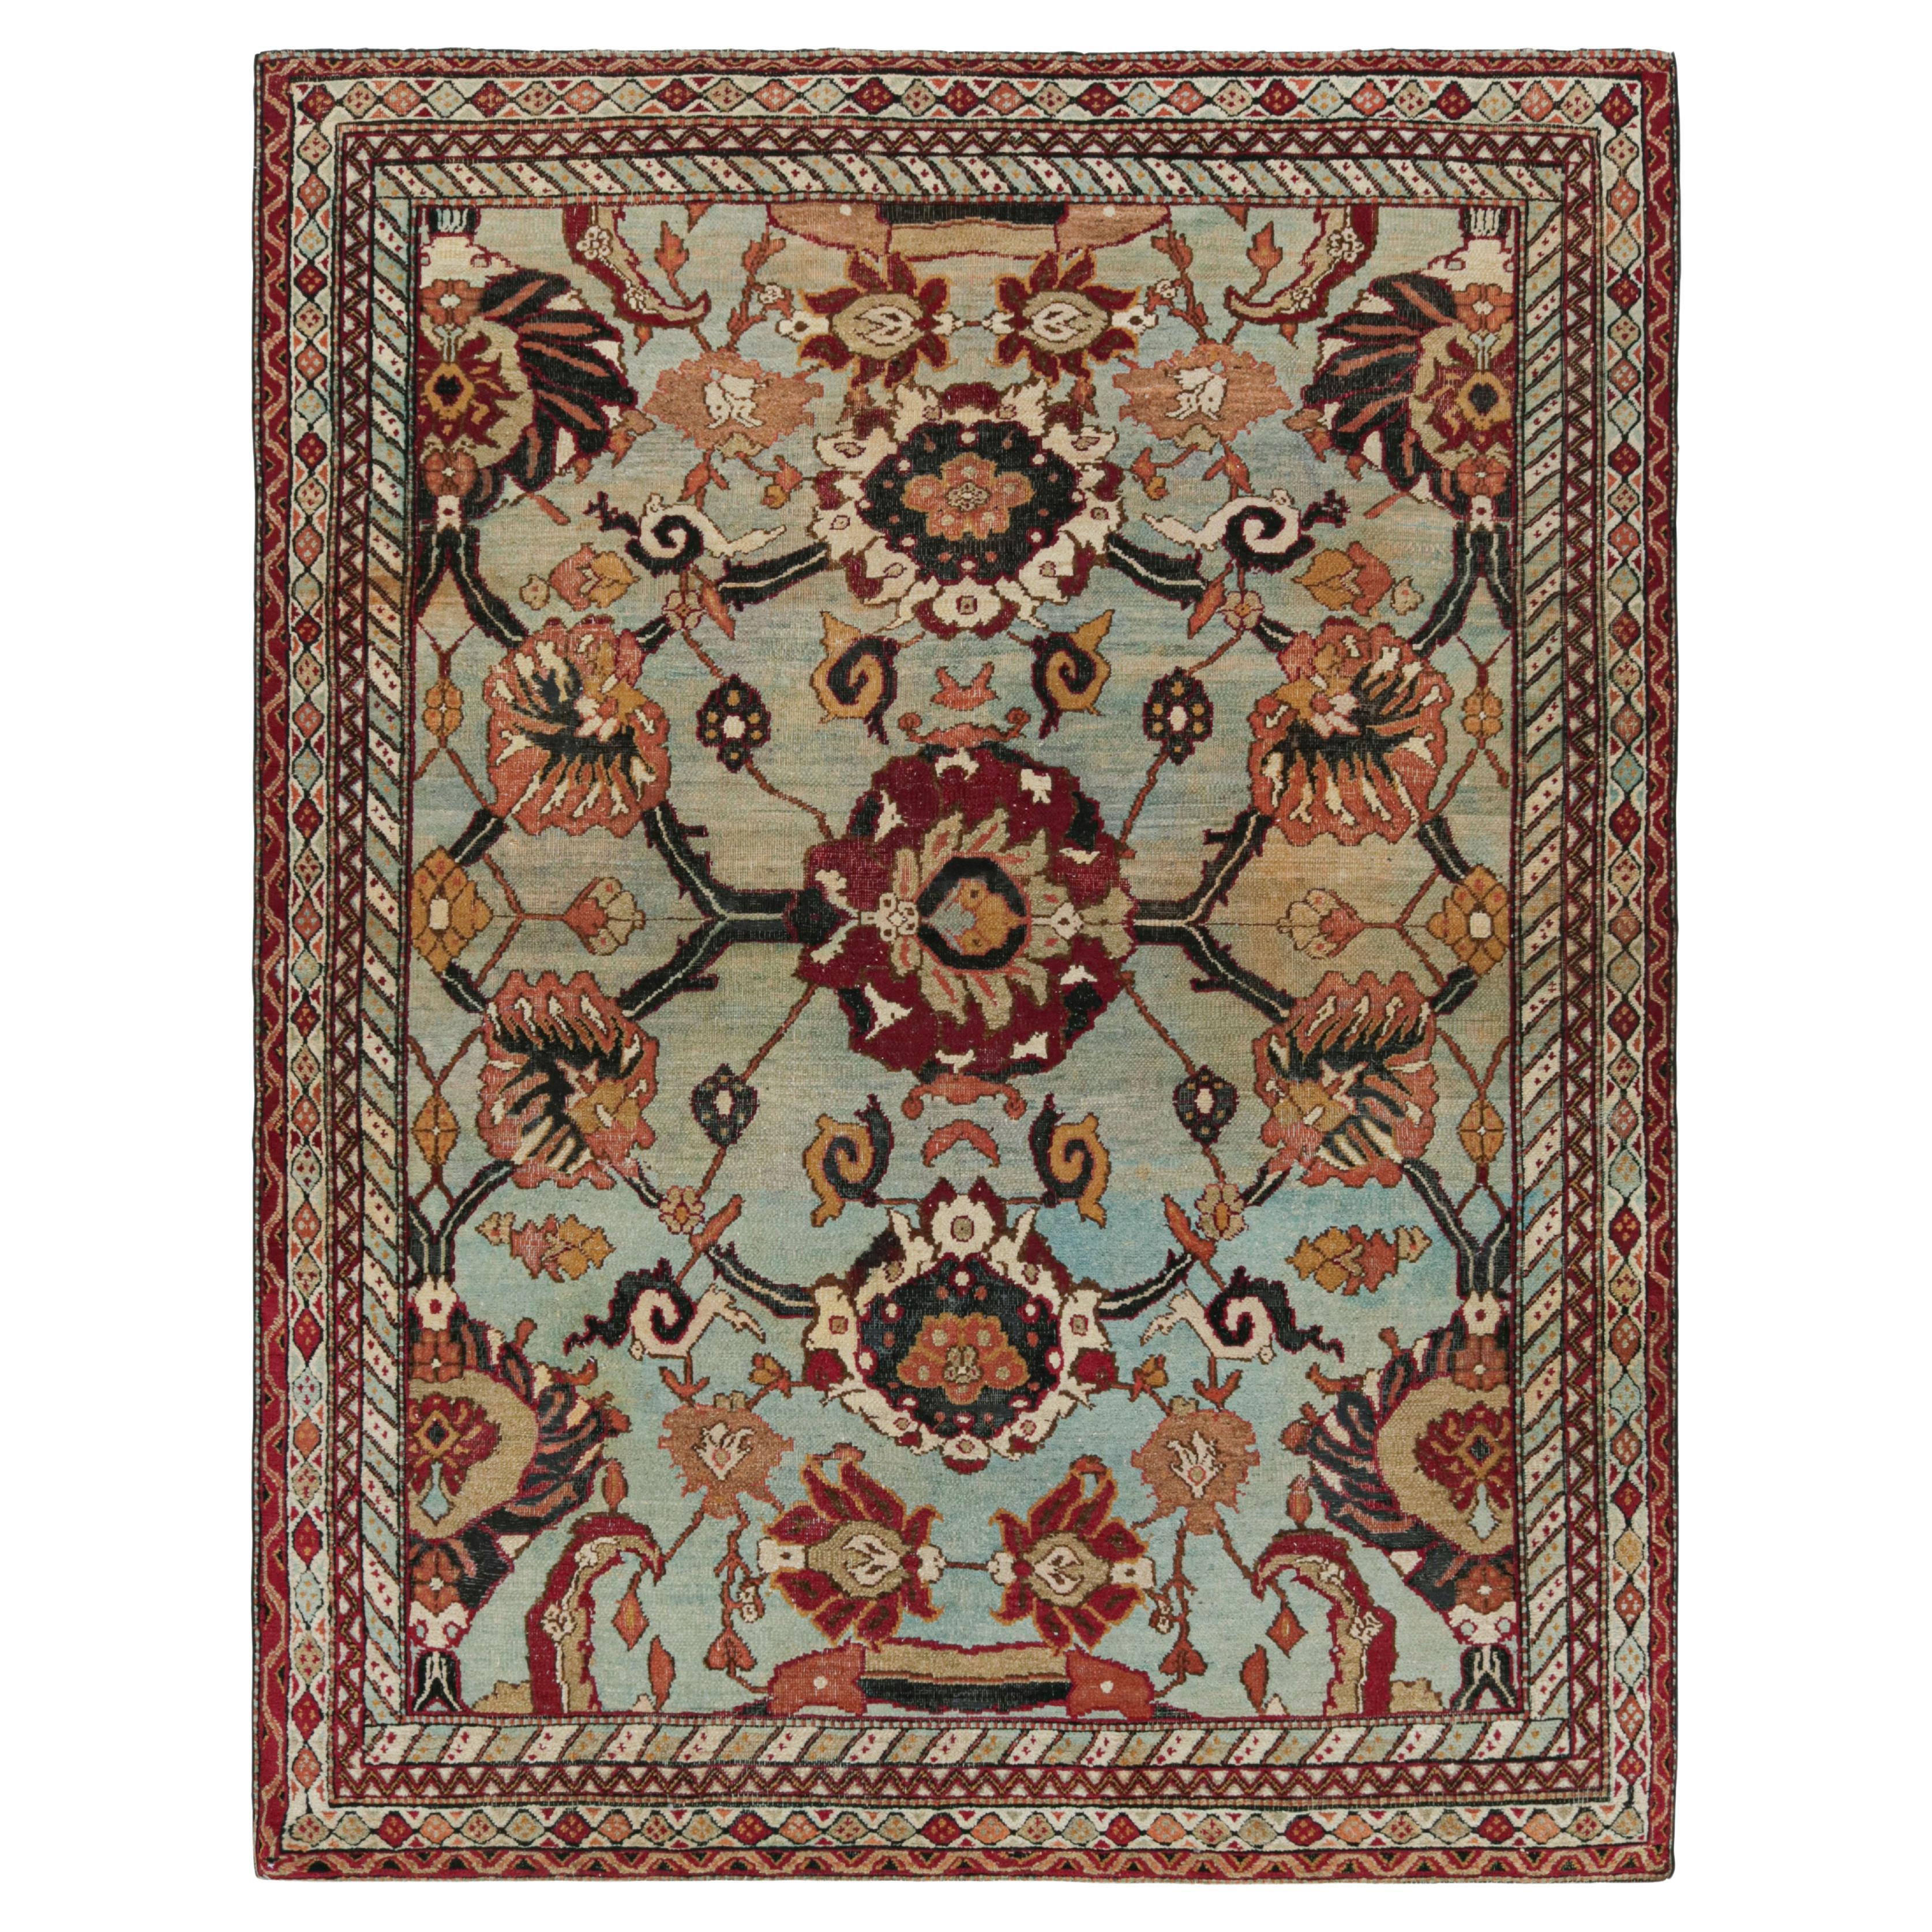 Antique Agra Rug in Blue with Floral Patterns